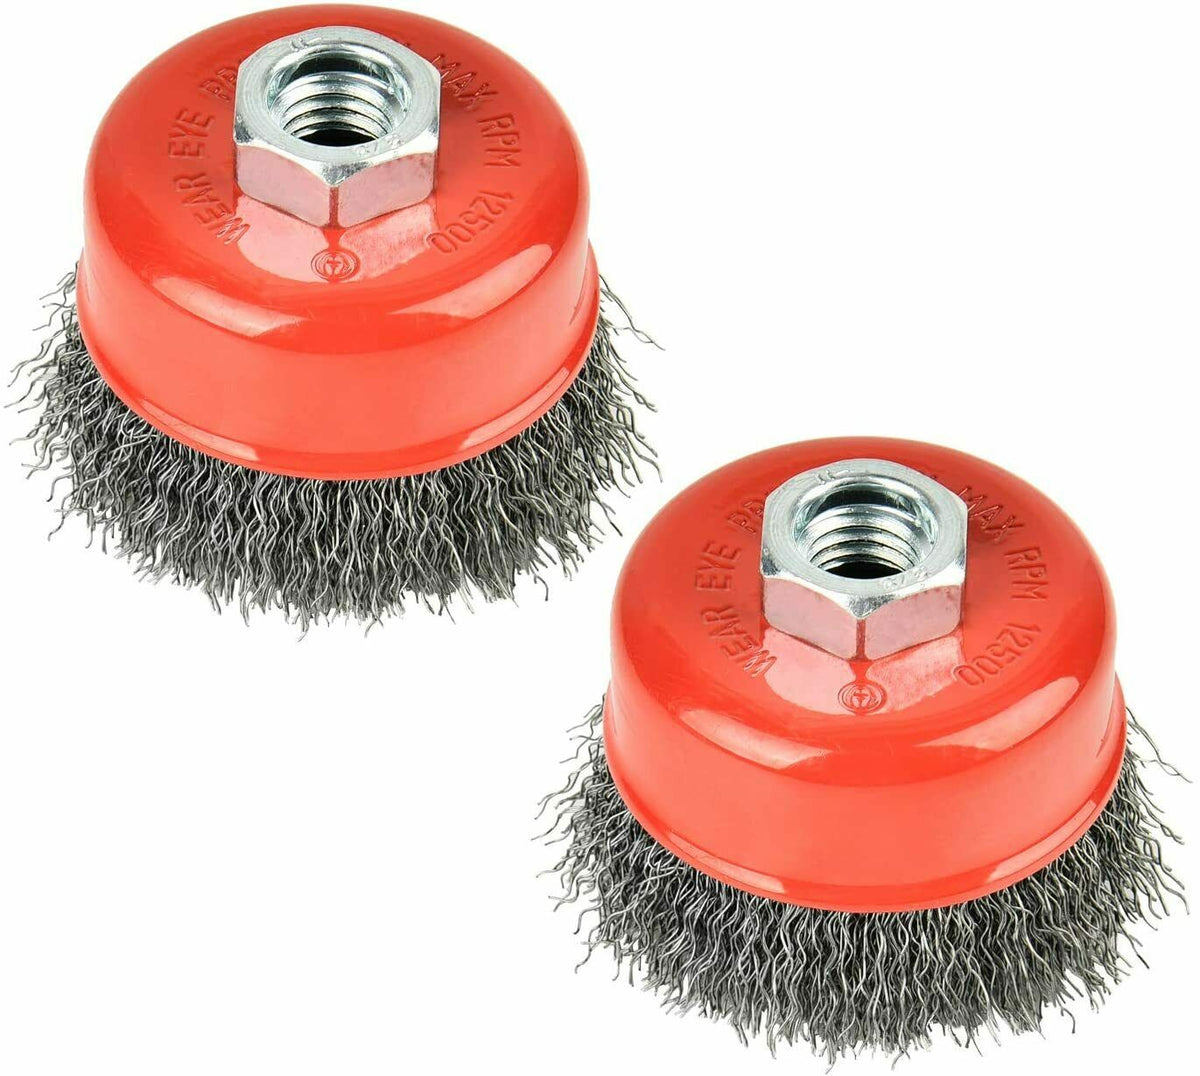 Action Cup Brush 3Xm10X1.5 SS